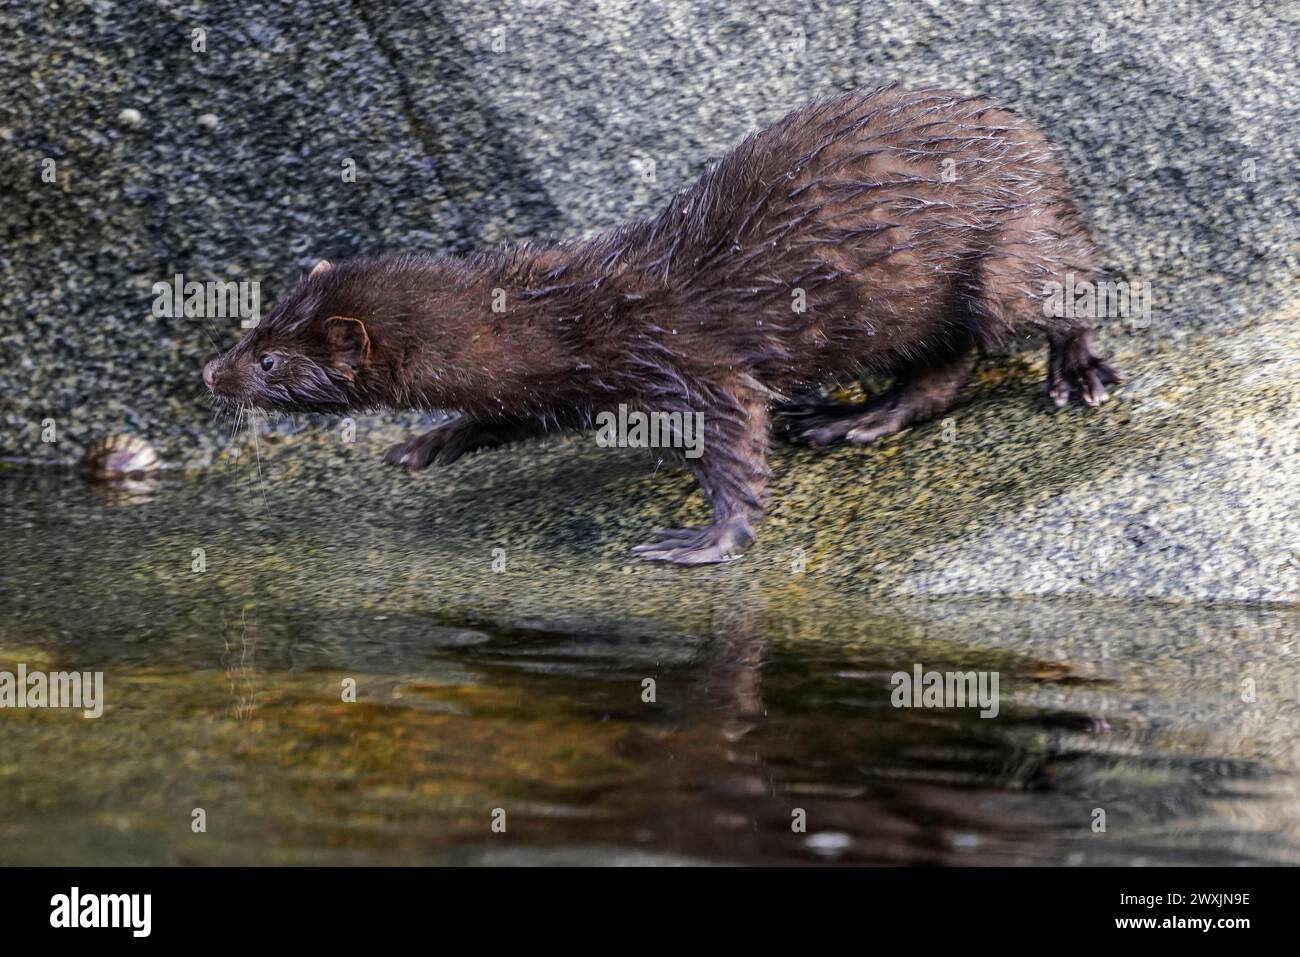 Minks roam the Chilean Fjords, posing a threat to native wildlife and ecosystems in this fragile Patagonian paradise. Stock Photo